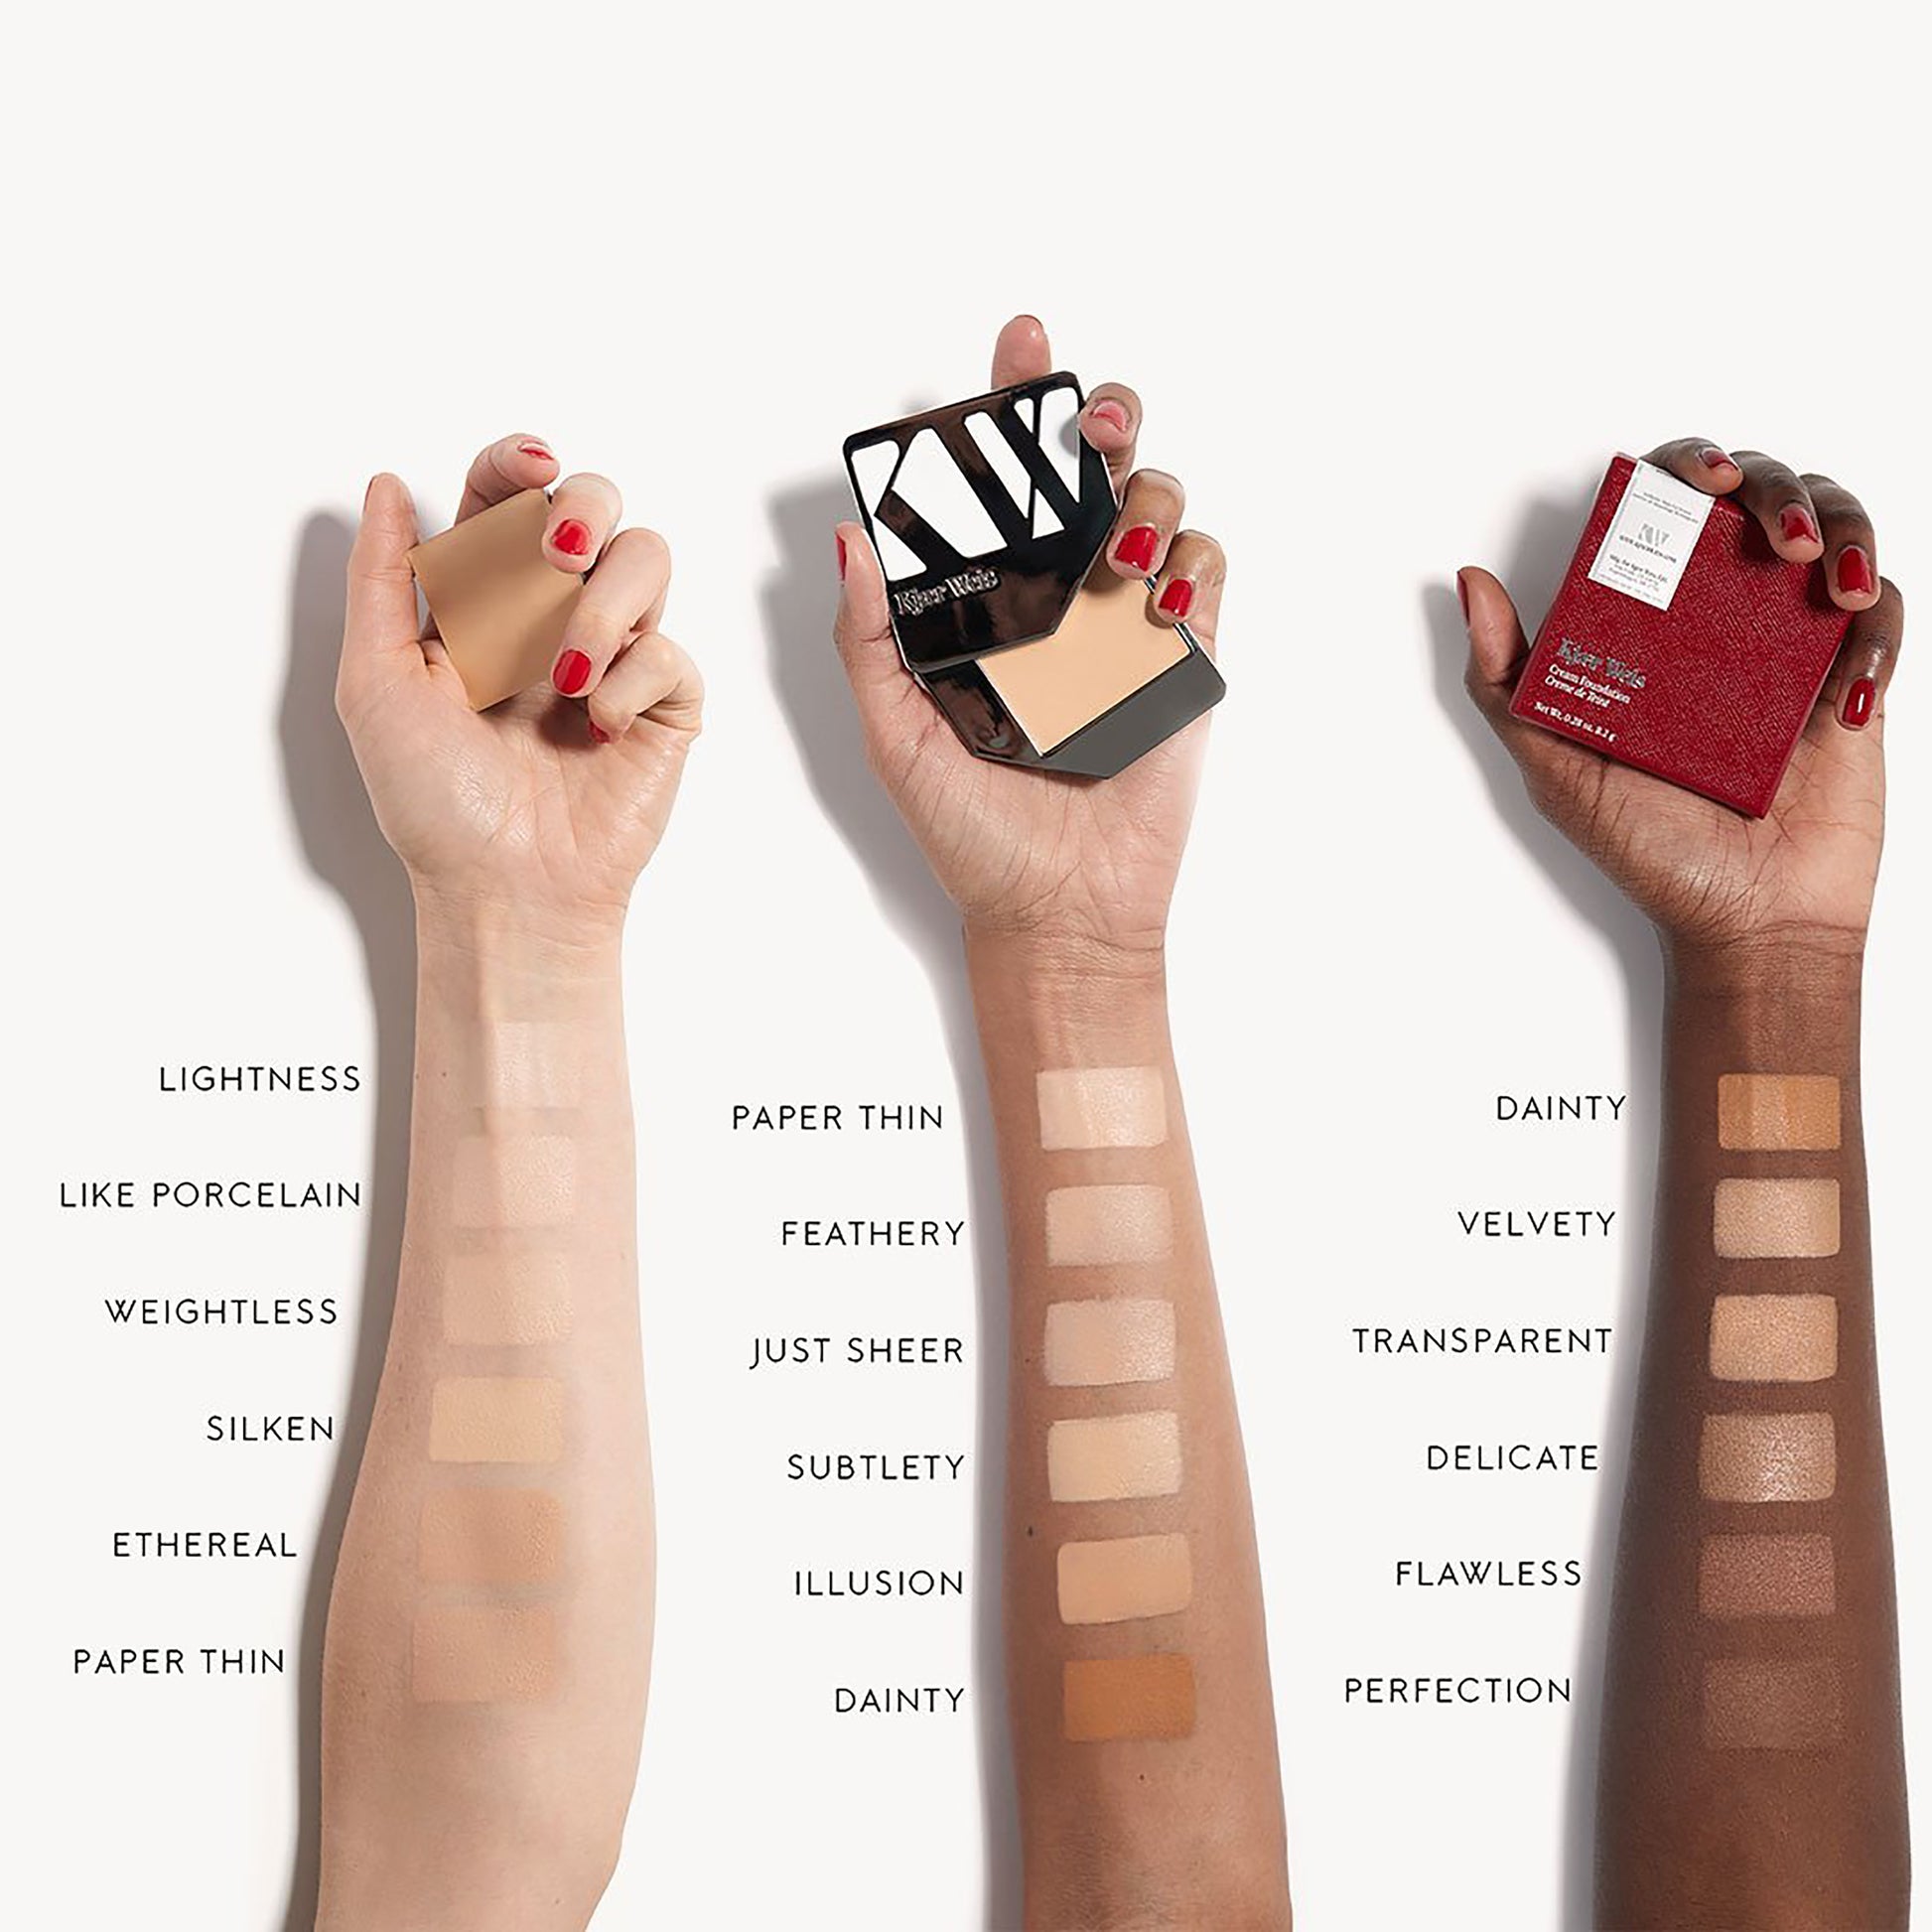 three arms of three different skin tones all with a swatch of cream foundation from darkest to lightest shade. delicate is the third darkest shade on the deepest skin tone.  